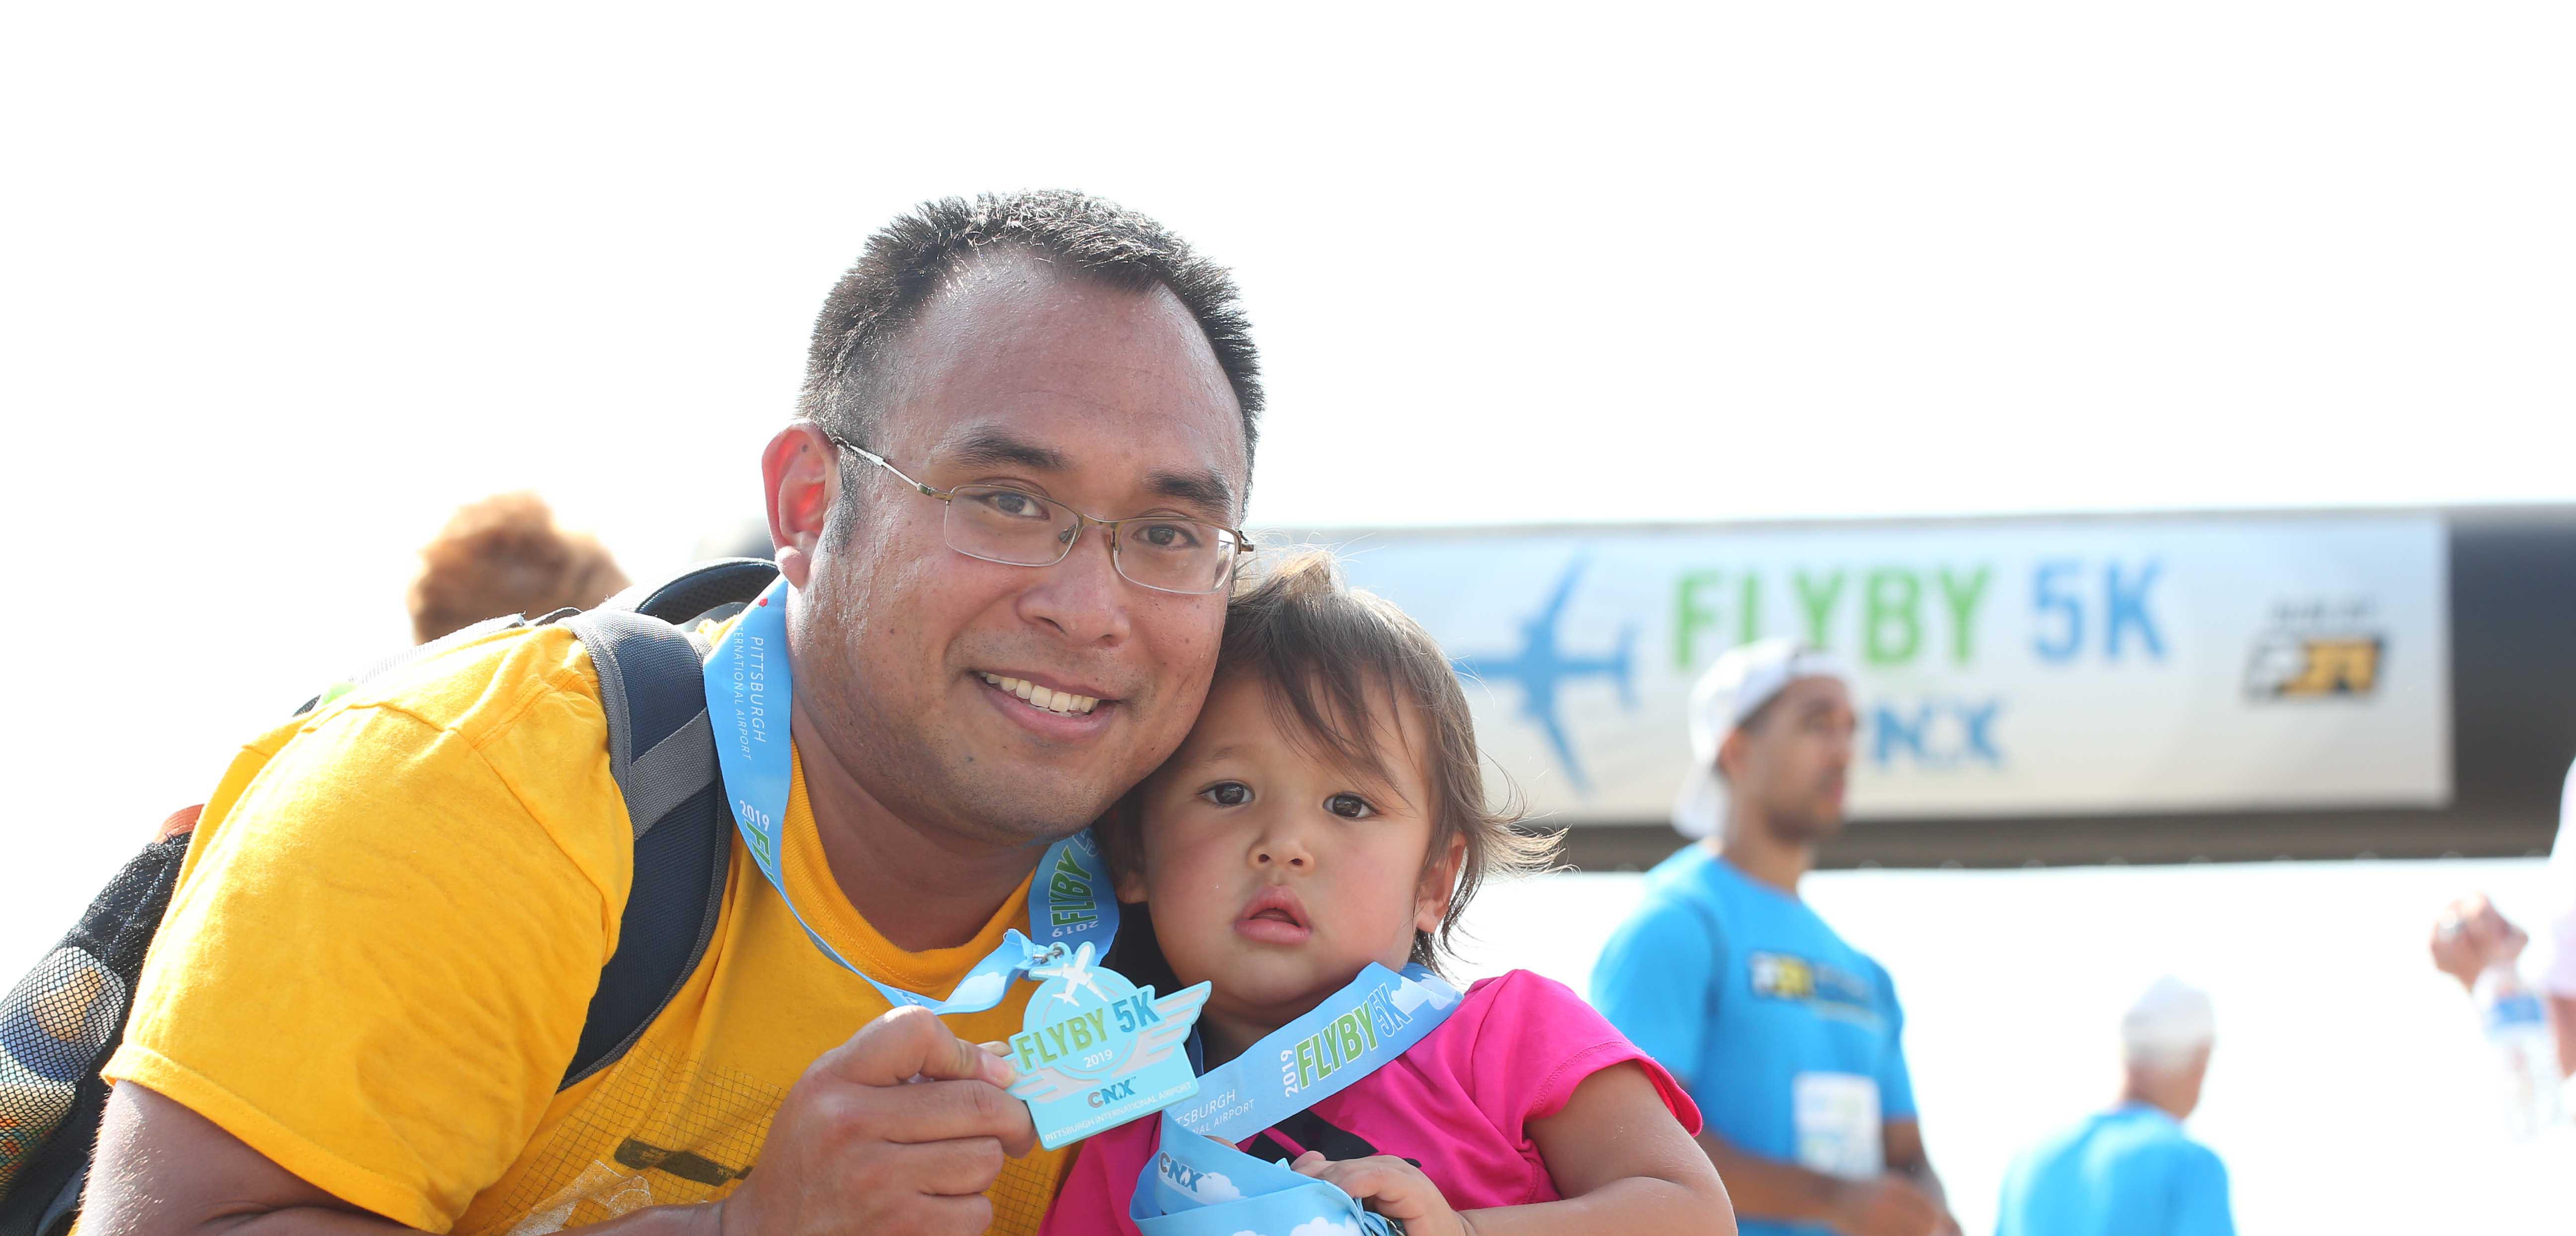 Middle-aged man holding a very young child as they smile with their Fly By 5K medals.